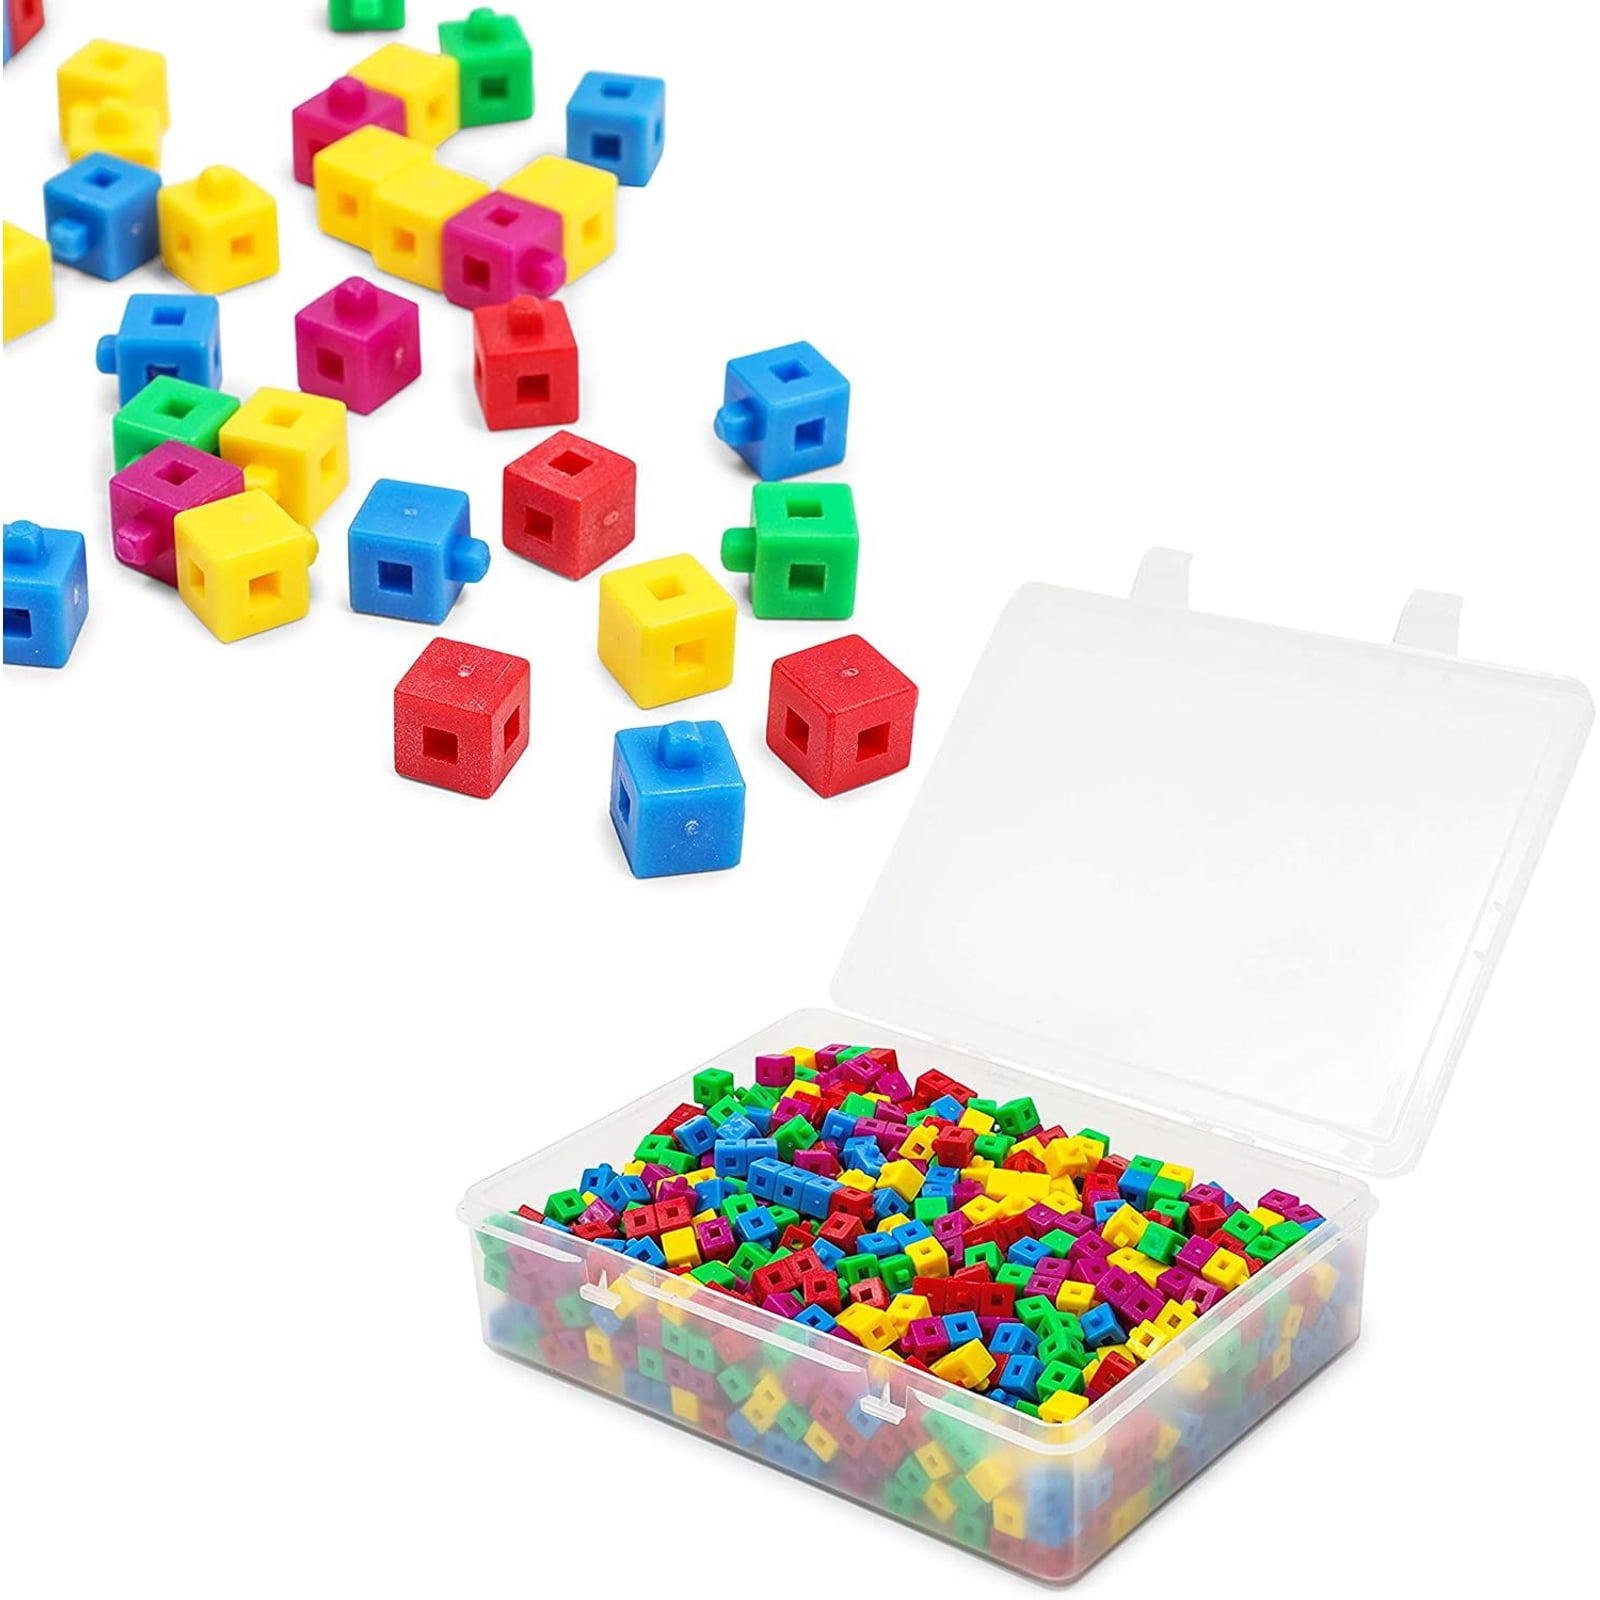 100 Unifix Cubes 10 COLORS Primary Math Manipulative COUNTING Place Value 